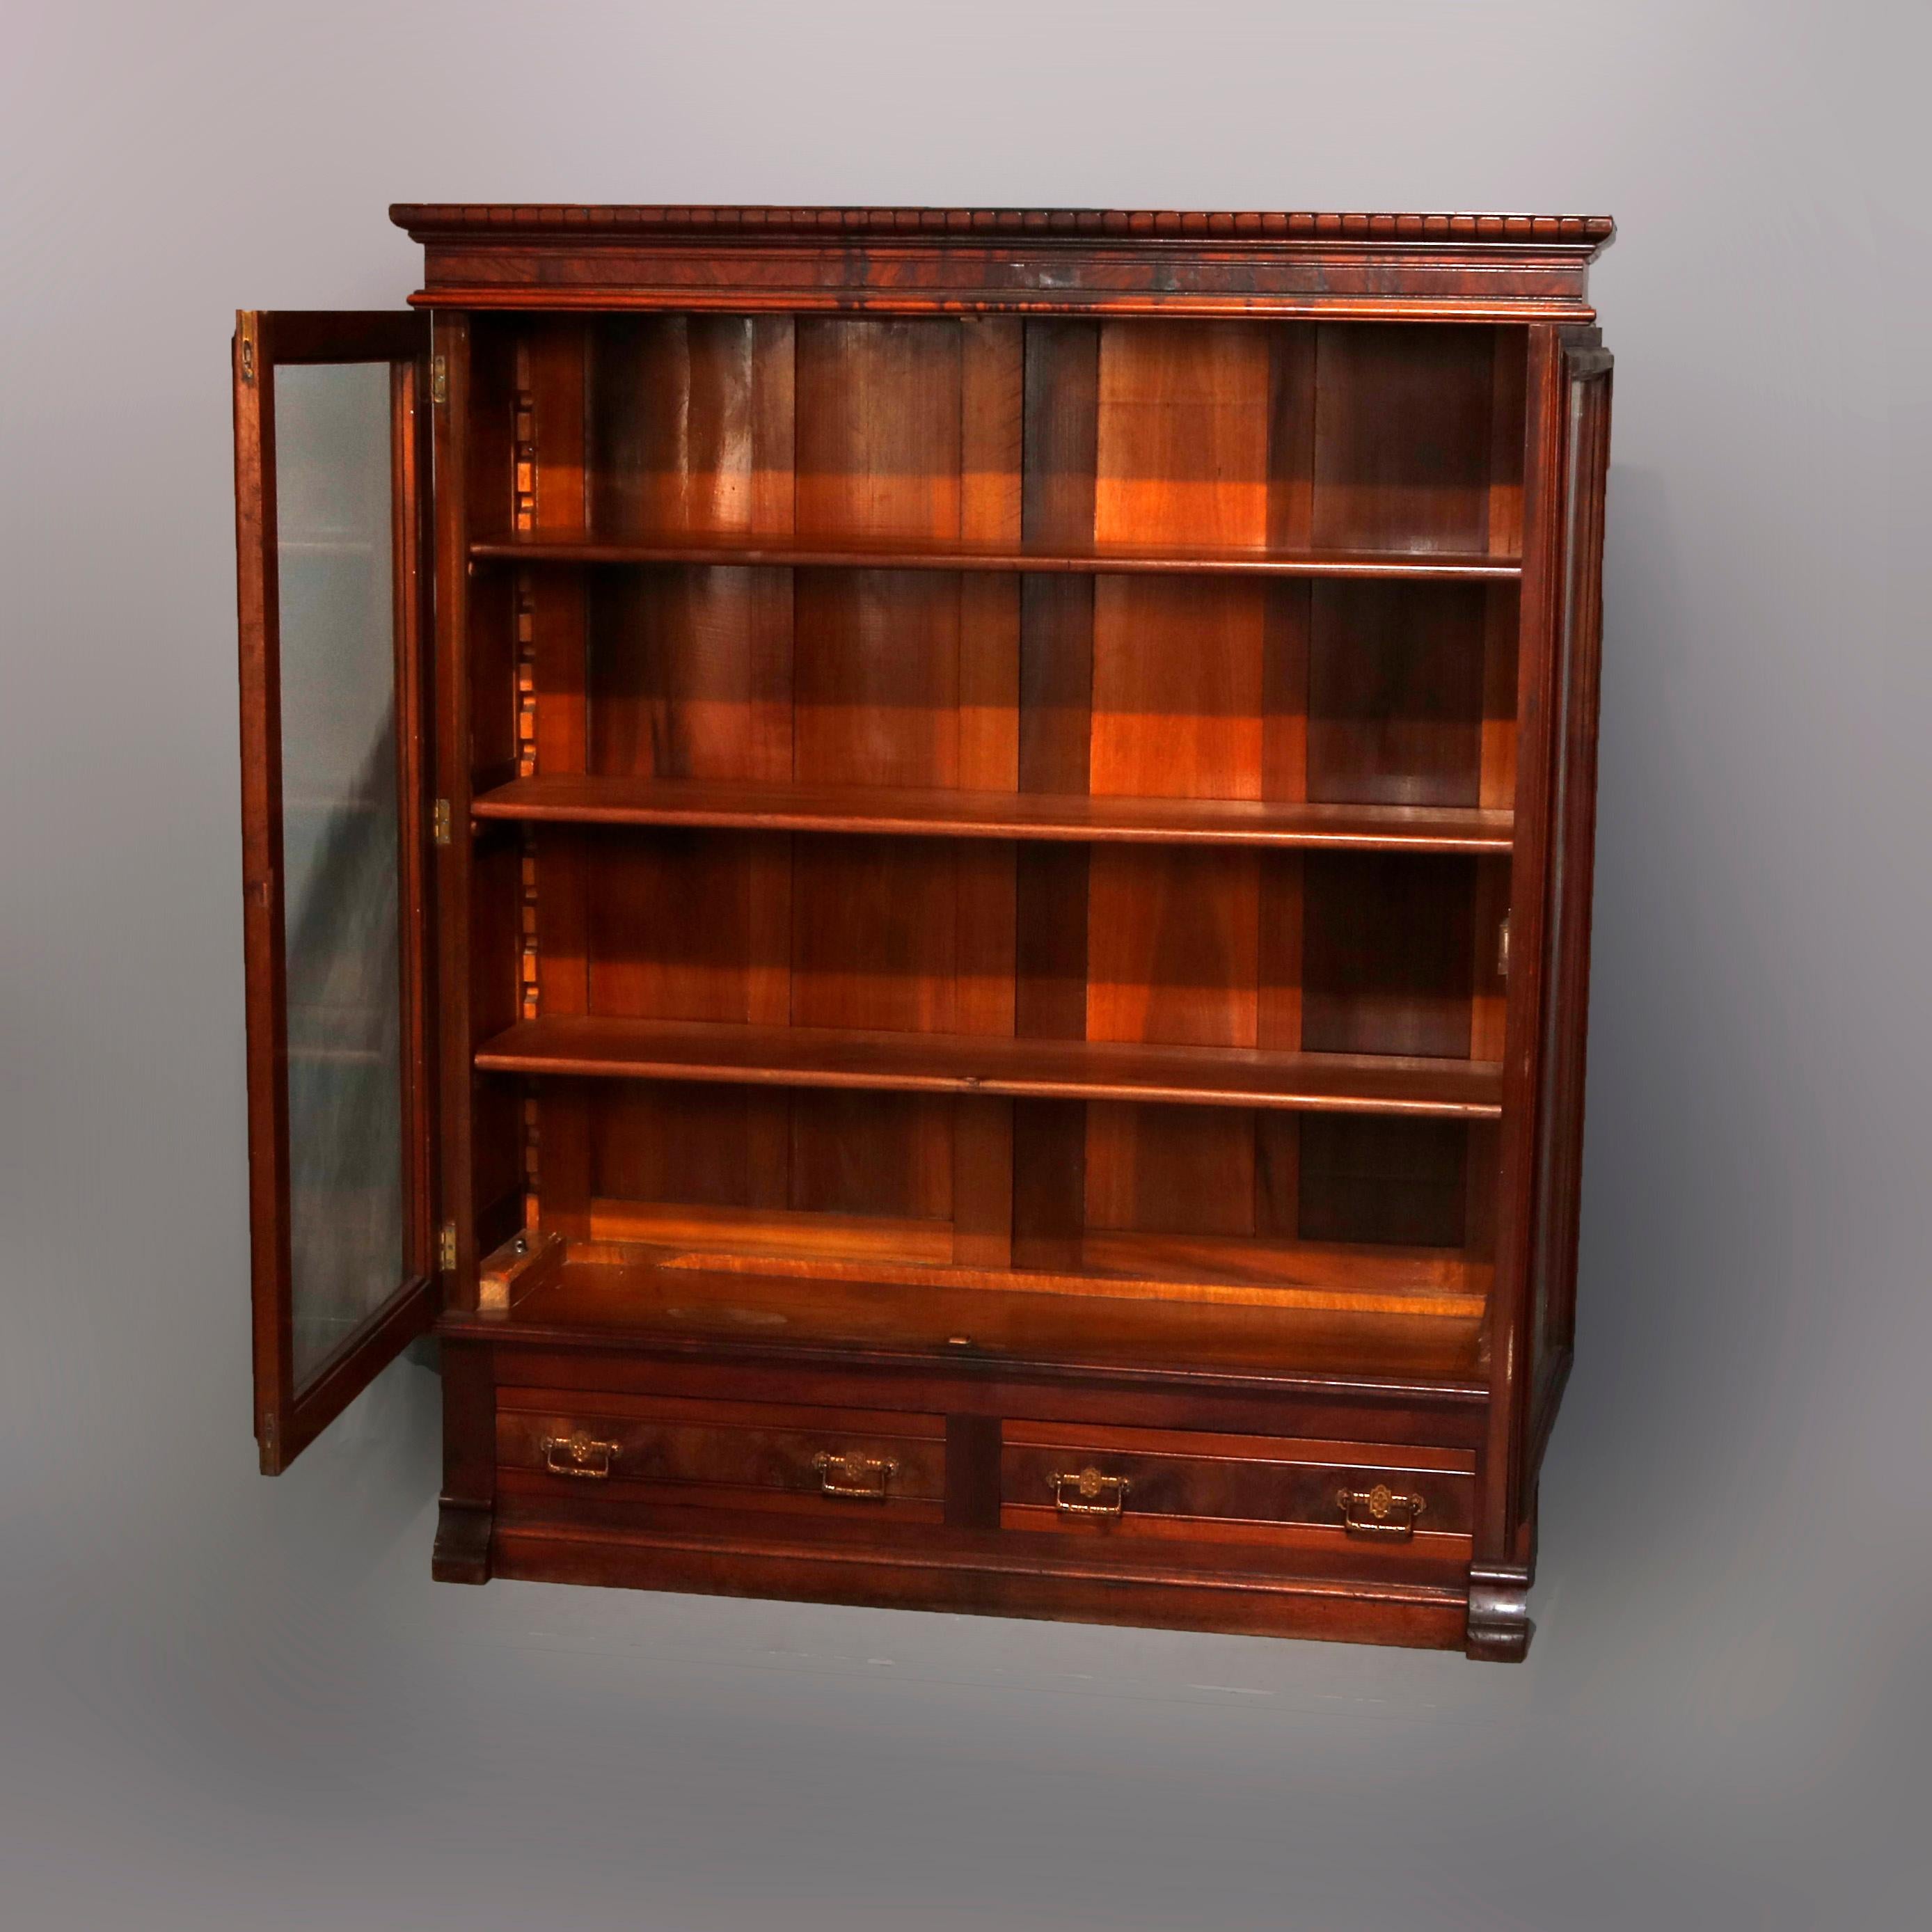 An antique Victorian enclosed bookcase offers burl paneled construction with upper case having double glass doors opening to interior with adjustable shelving and surmounting base with two drawers, circa 1890

Measures: 60